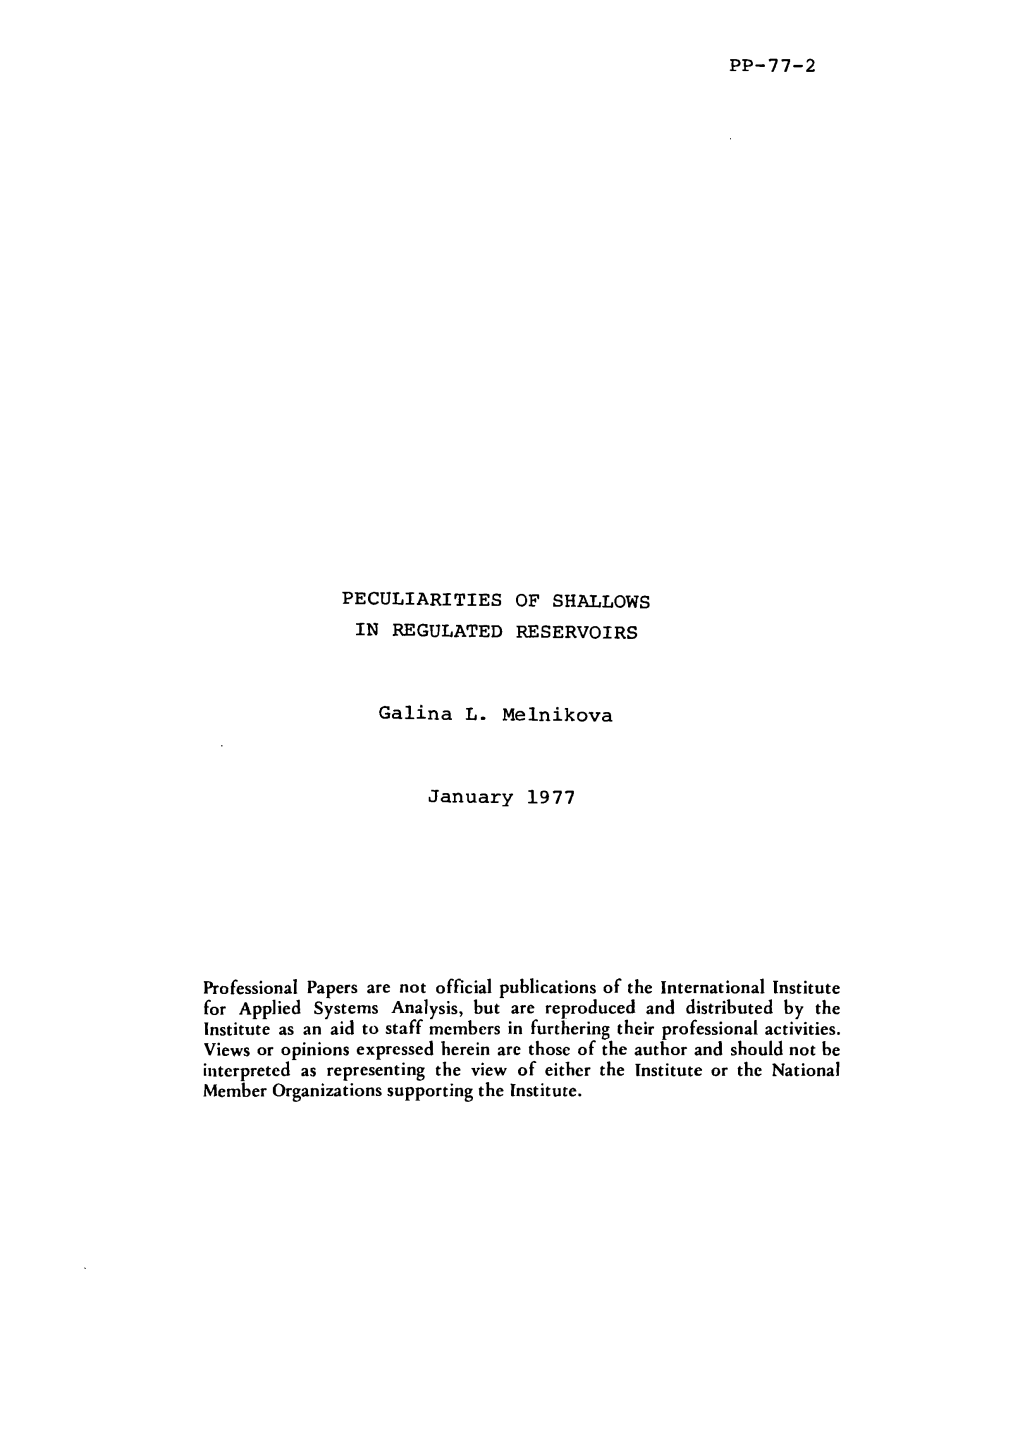 PP-77-2 PECULIARITIES of SHALLOWS in REGULATED RESERVOIRS Ga1ina L. Me1nikova January 1977